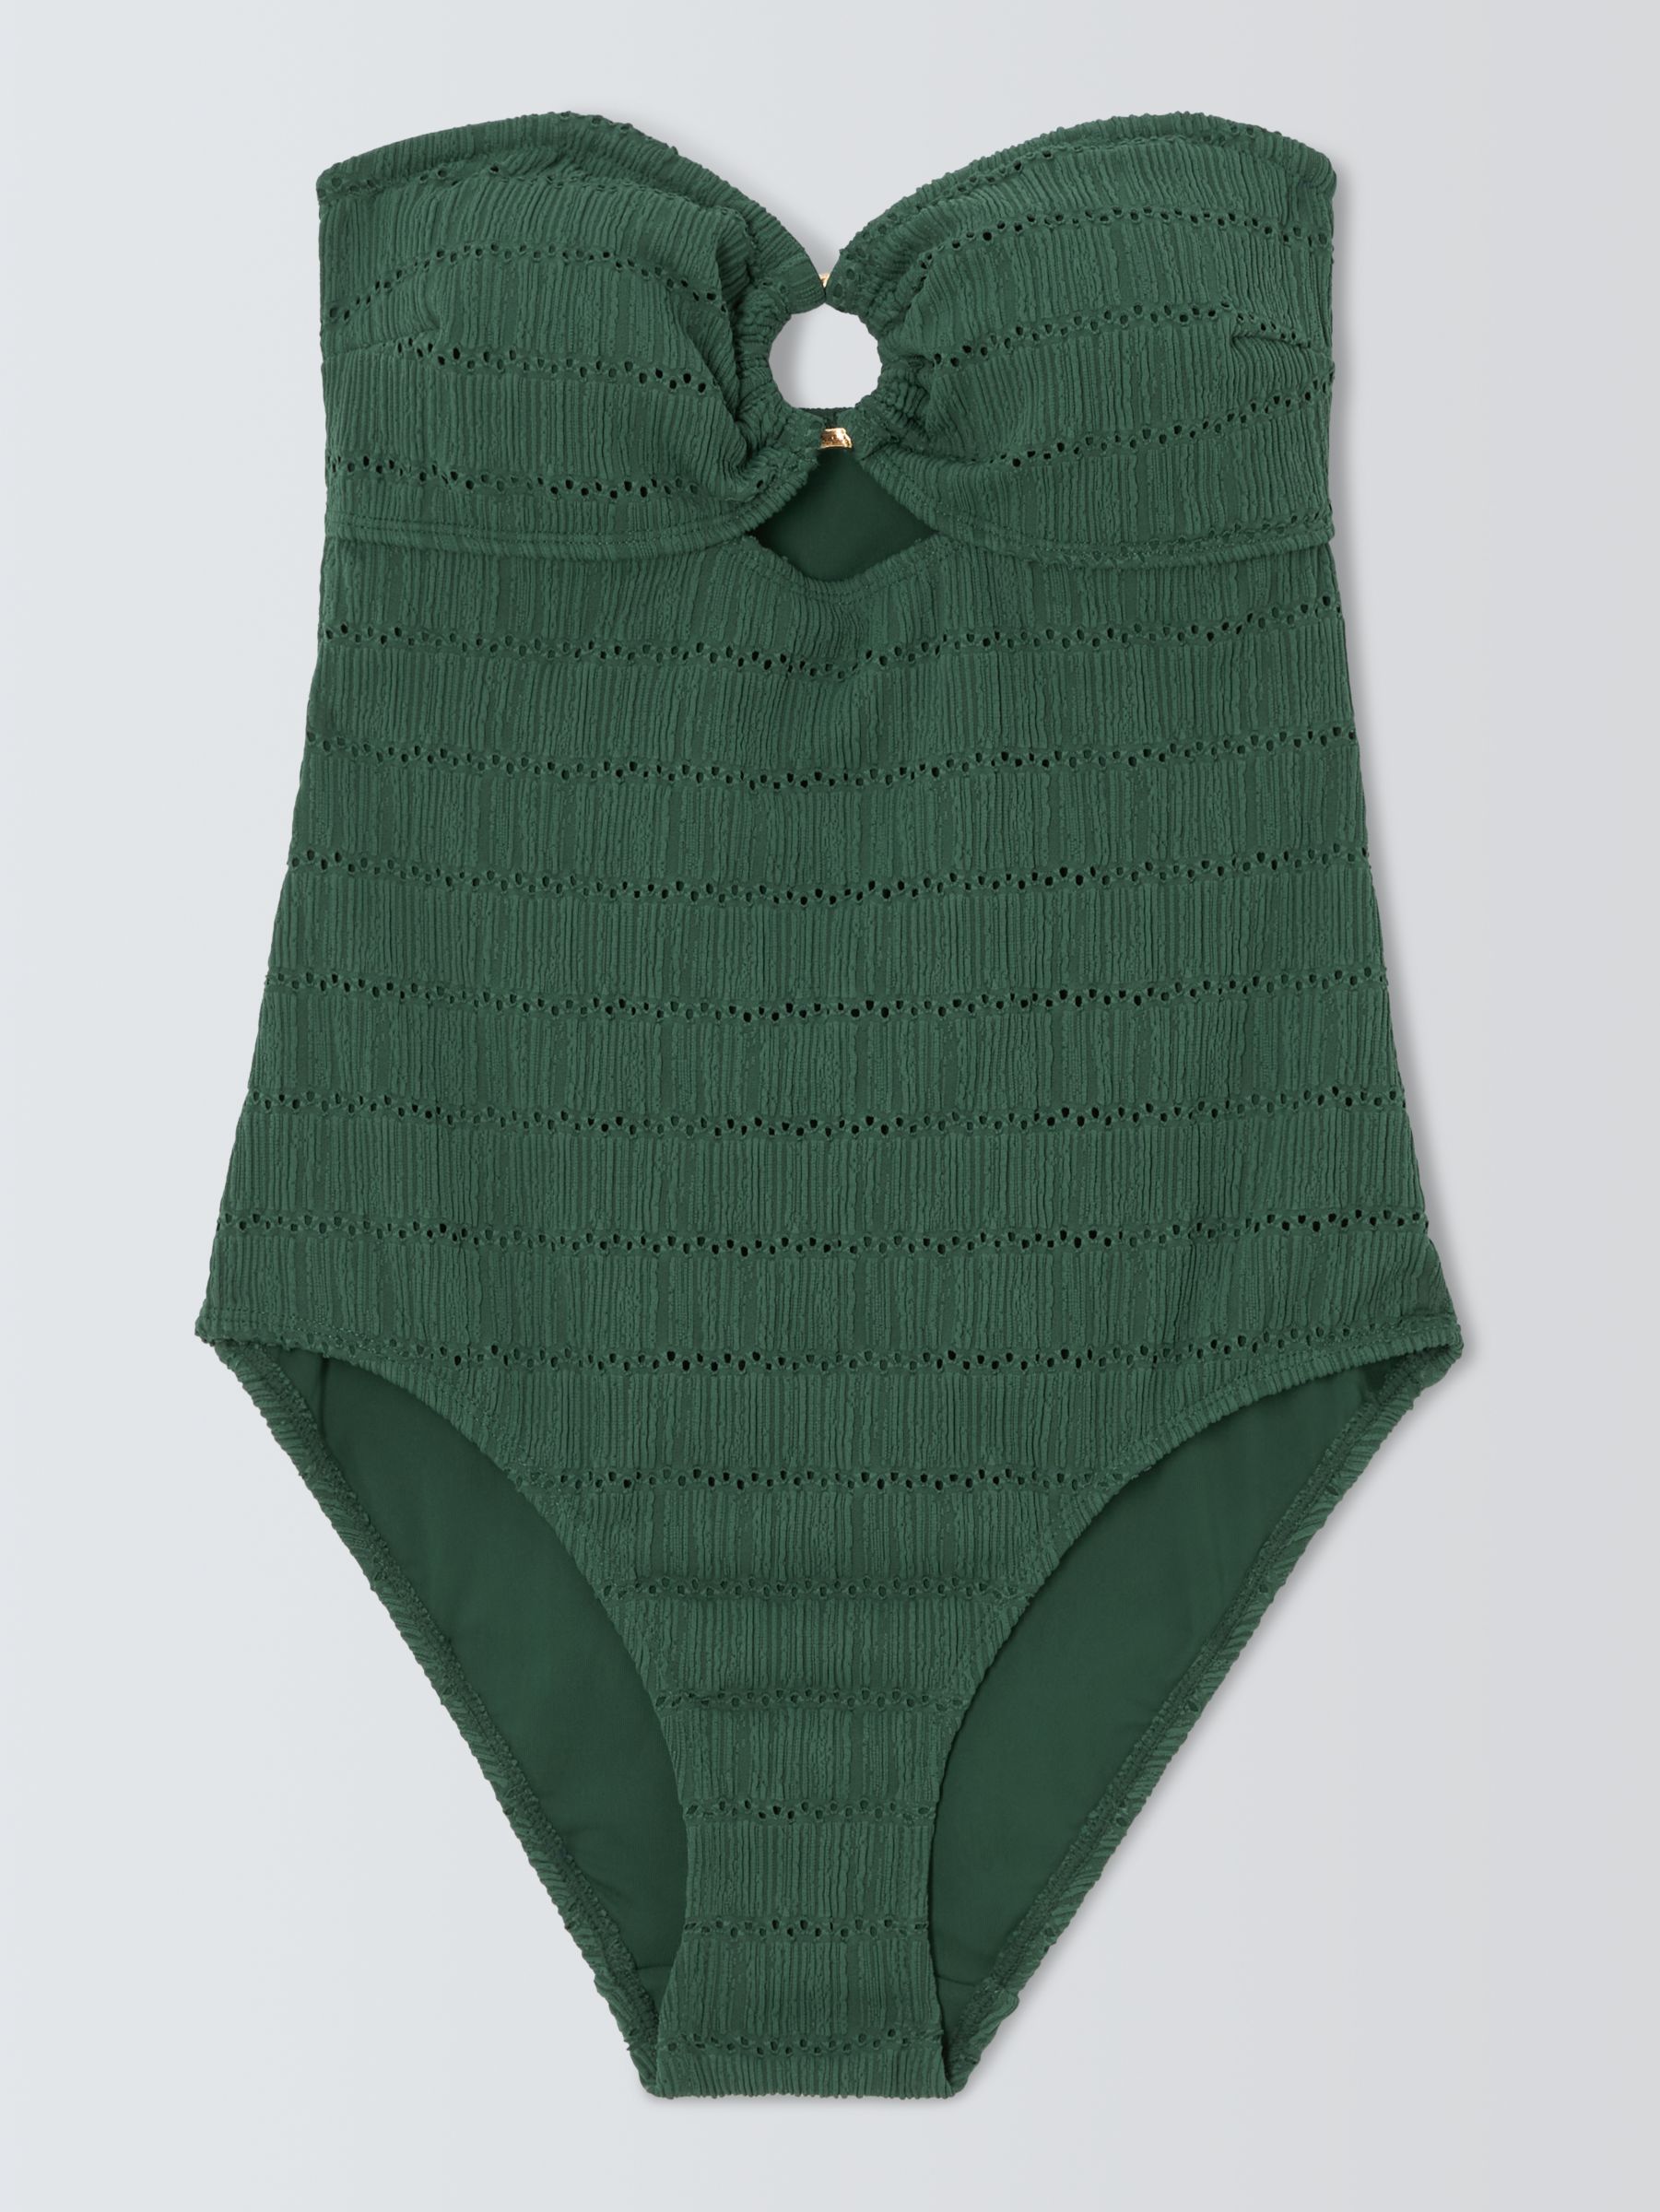 Buy AND/OR Bali Crochet Swimsuit, Green Online at johnlewis.com